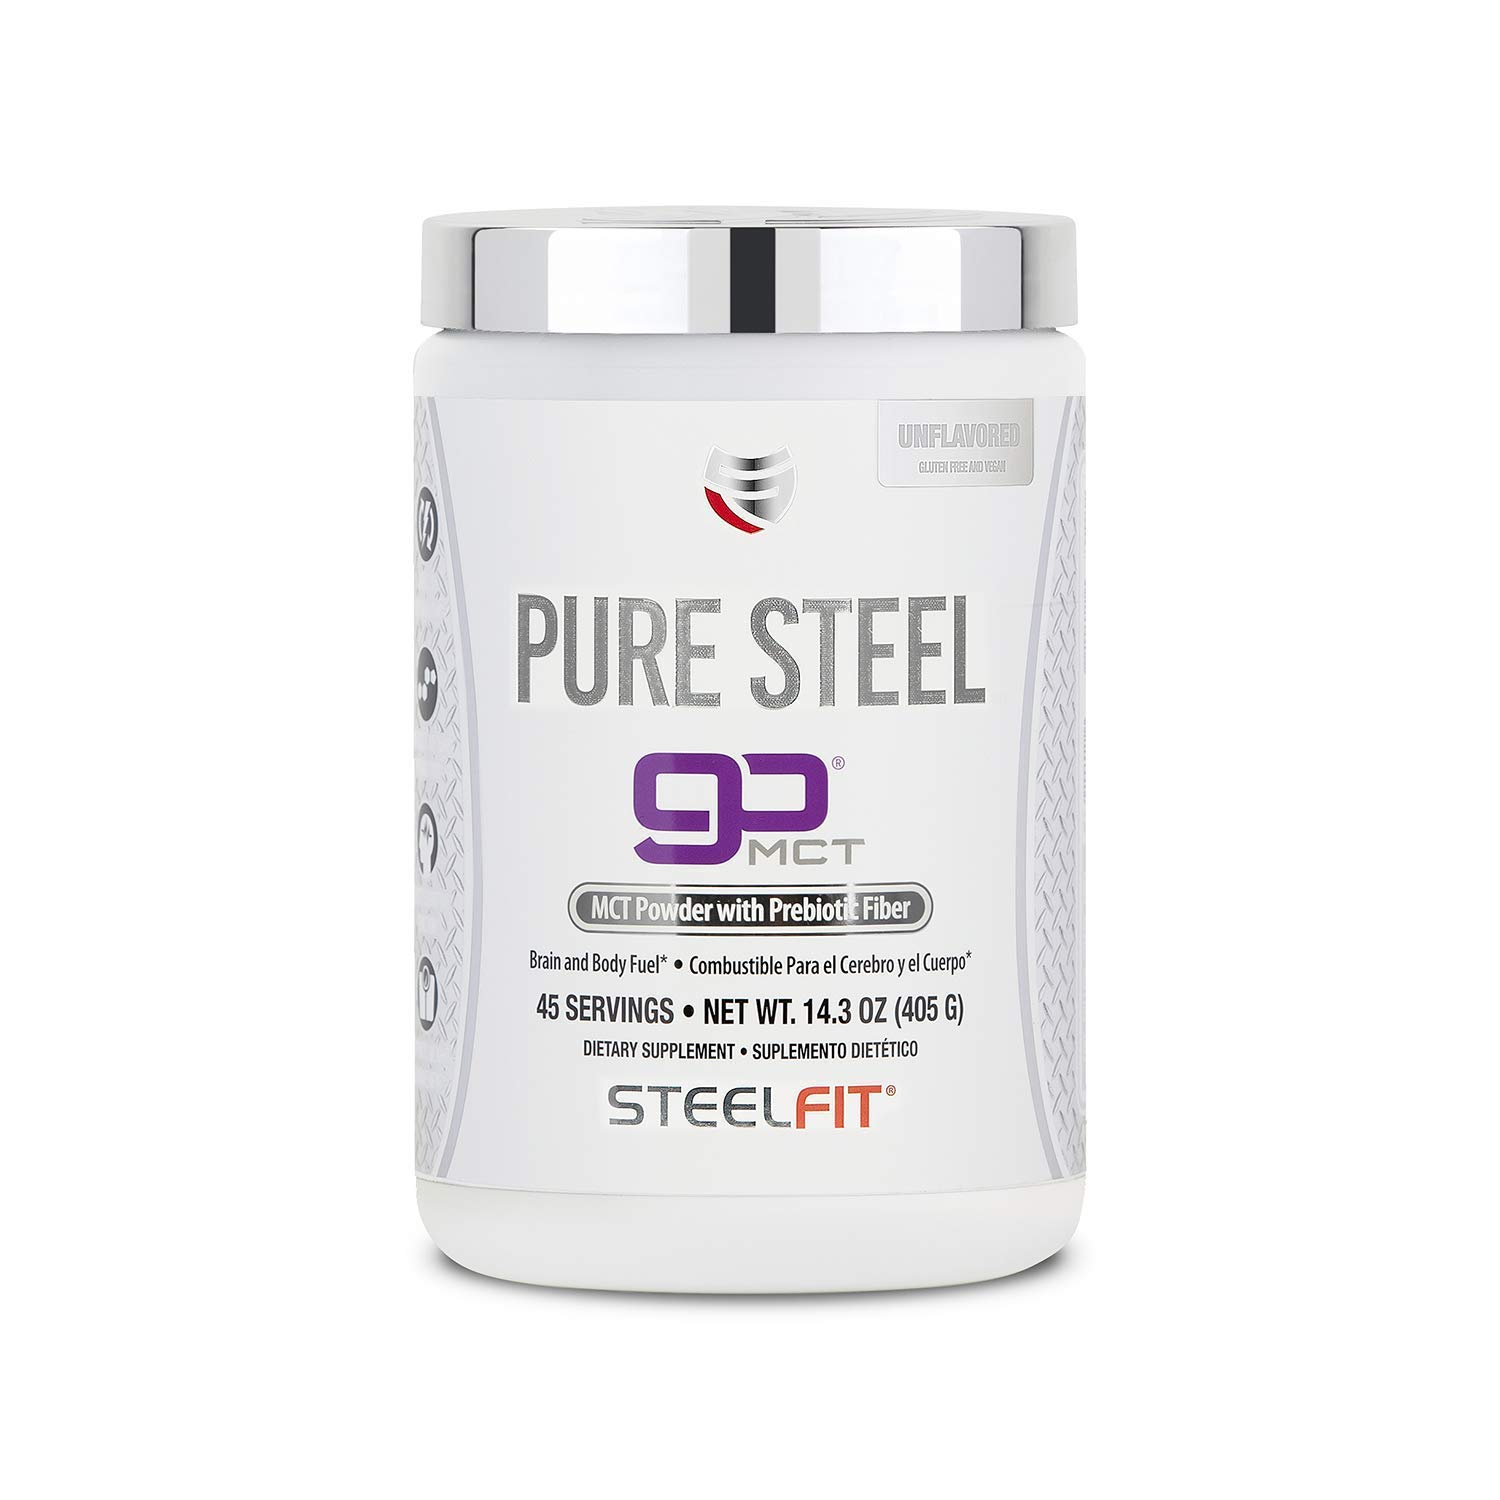 Pure Steel goMCT